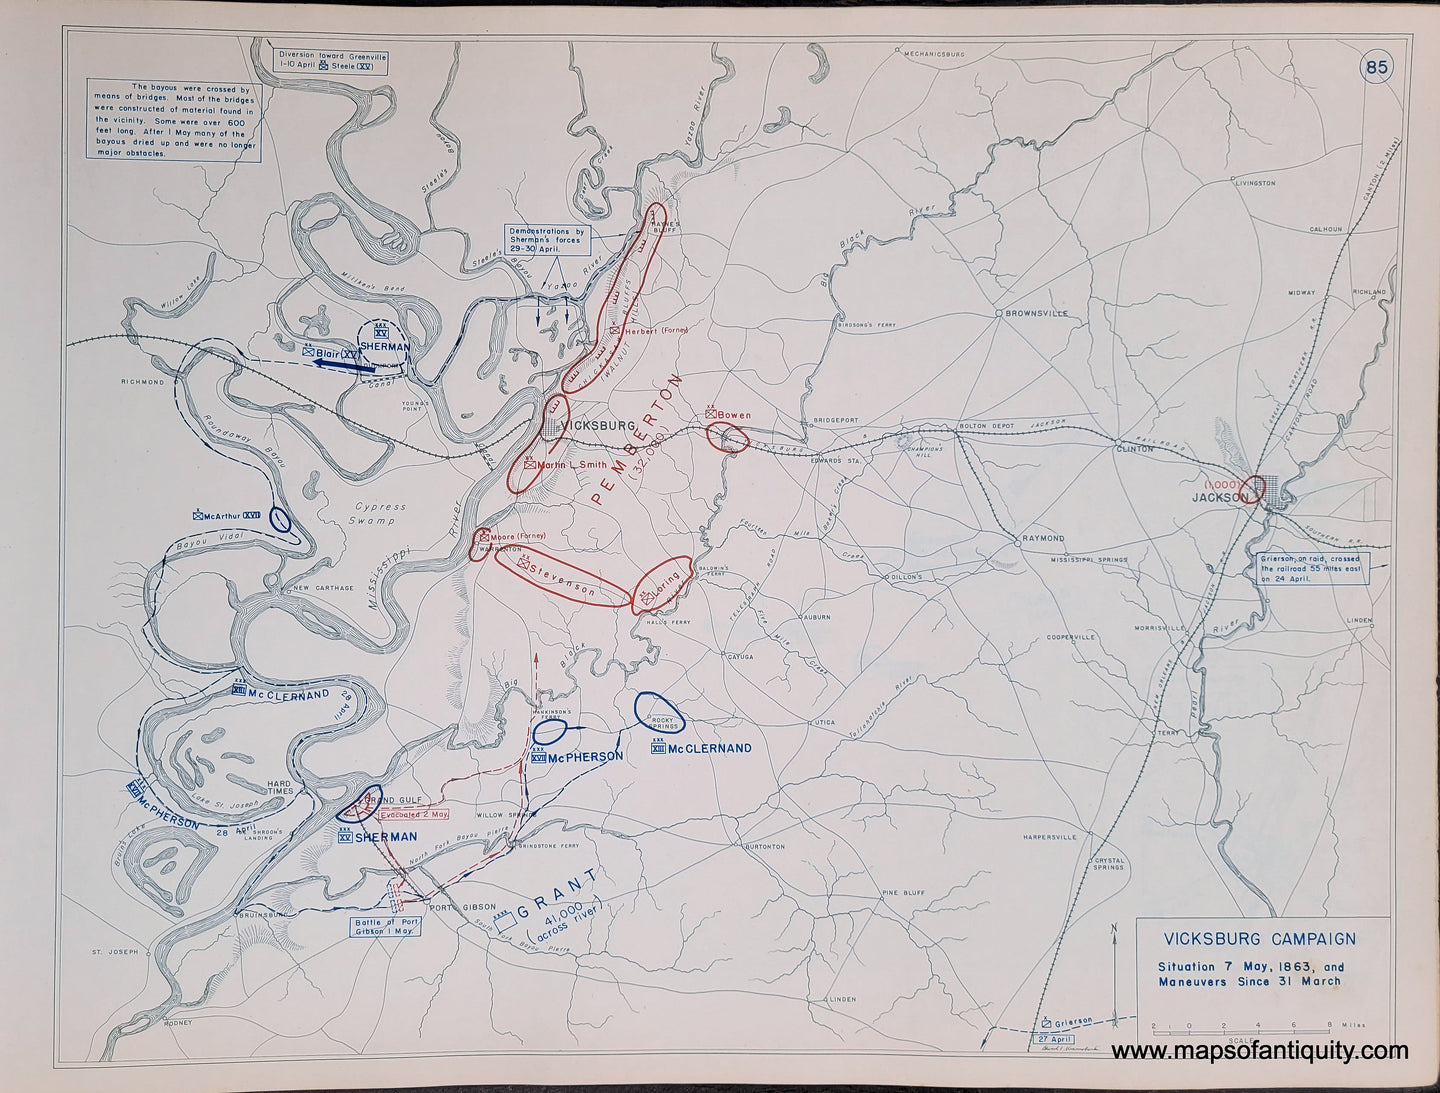 Genuine-Antique-Map-Vicksburg-Campaign-Situation-7-May-1863-and-Maneuvers-Since-31-March-1948-Matthew-Forney-Steele-Dept-of-Military-Art-and-Engineering-US-Military-Academy-West-Point-Maps-Of-Antiquity